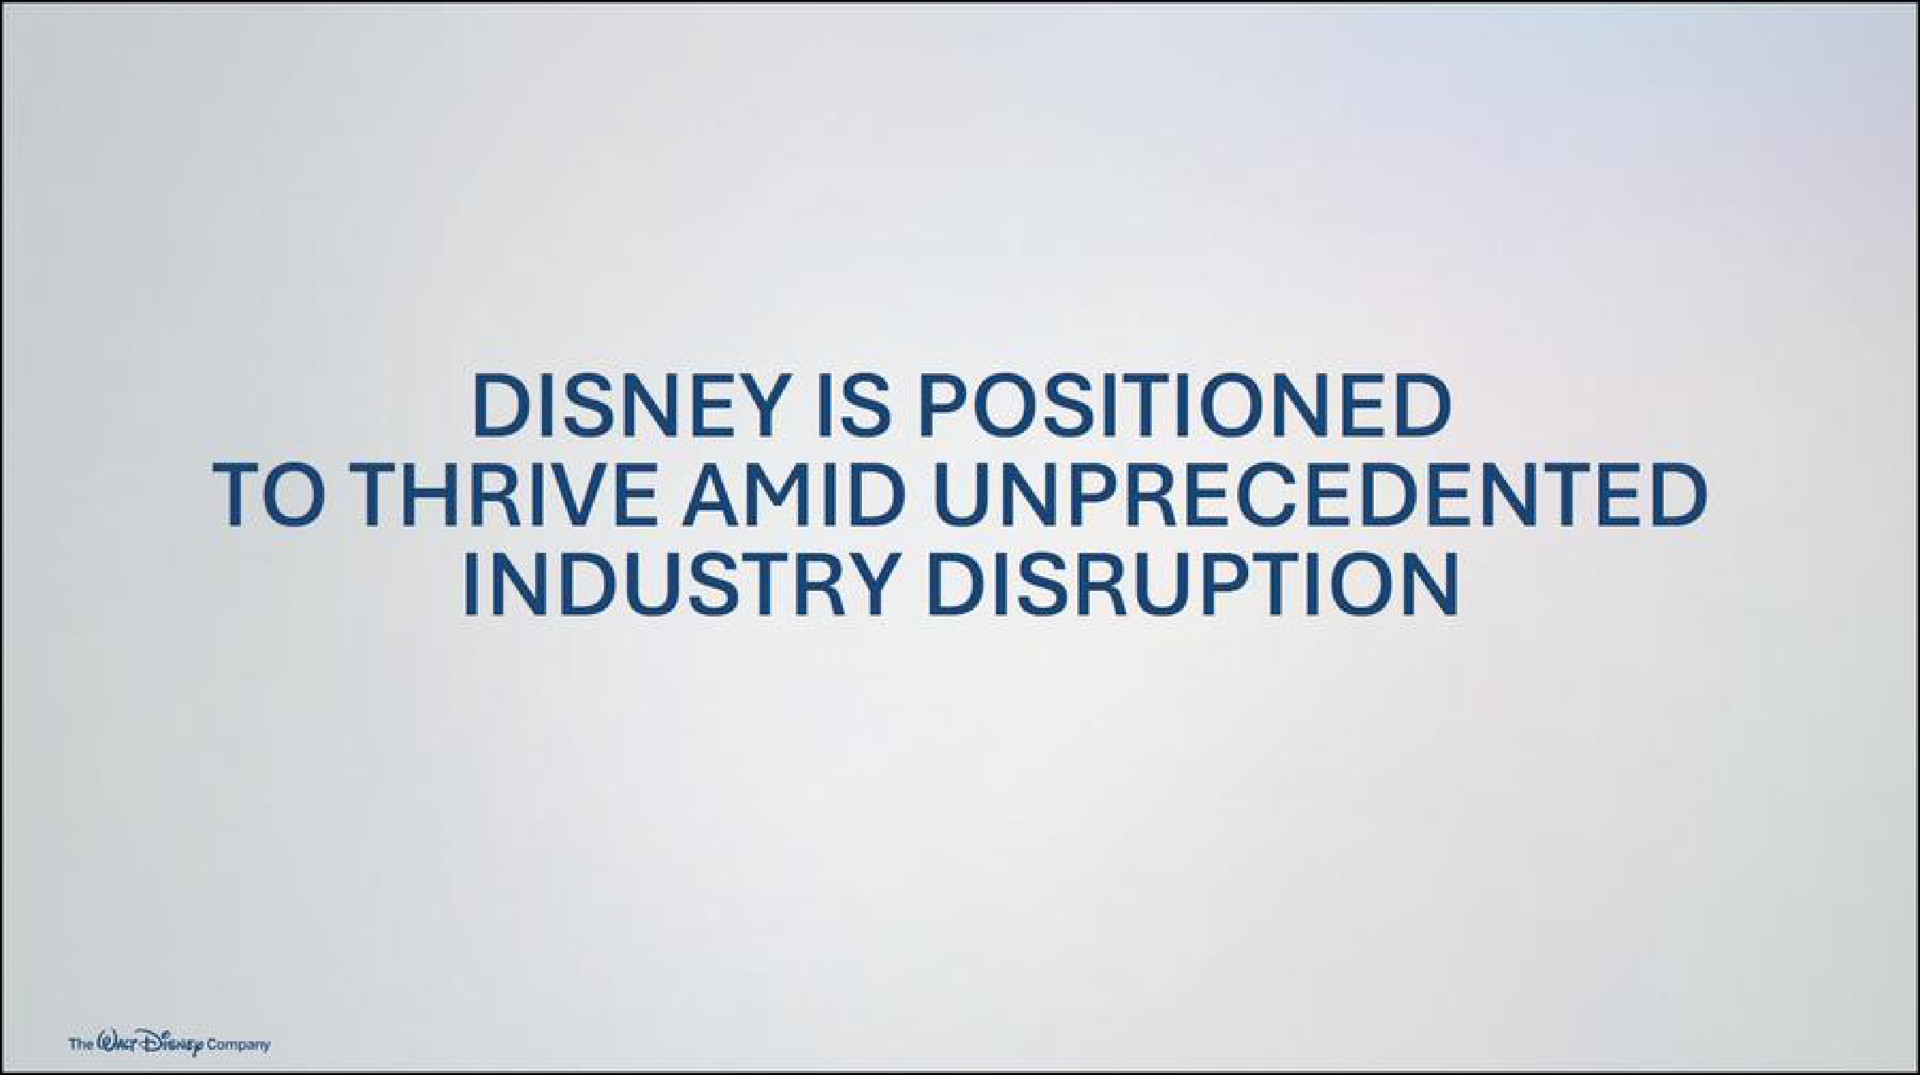 is positioned to thrive amid unprecedented industry disruption | Disney